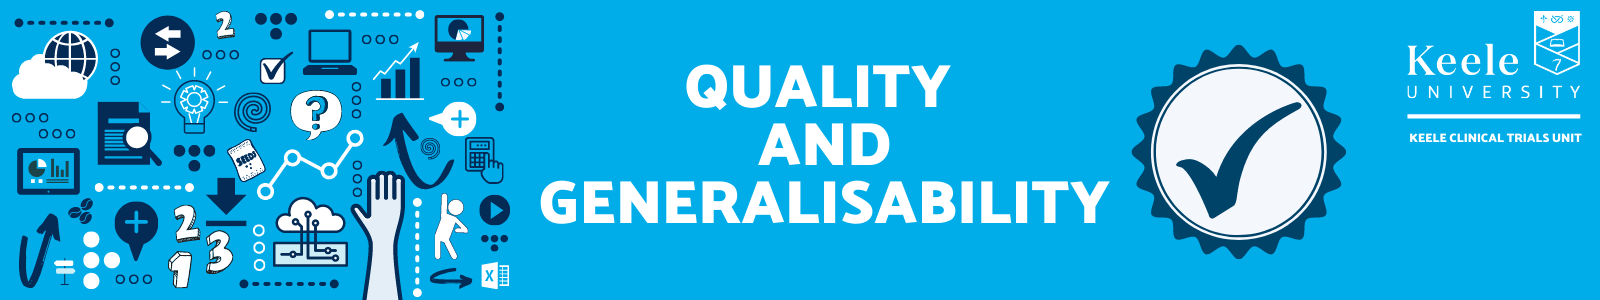 Quality and generalisability